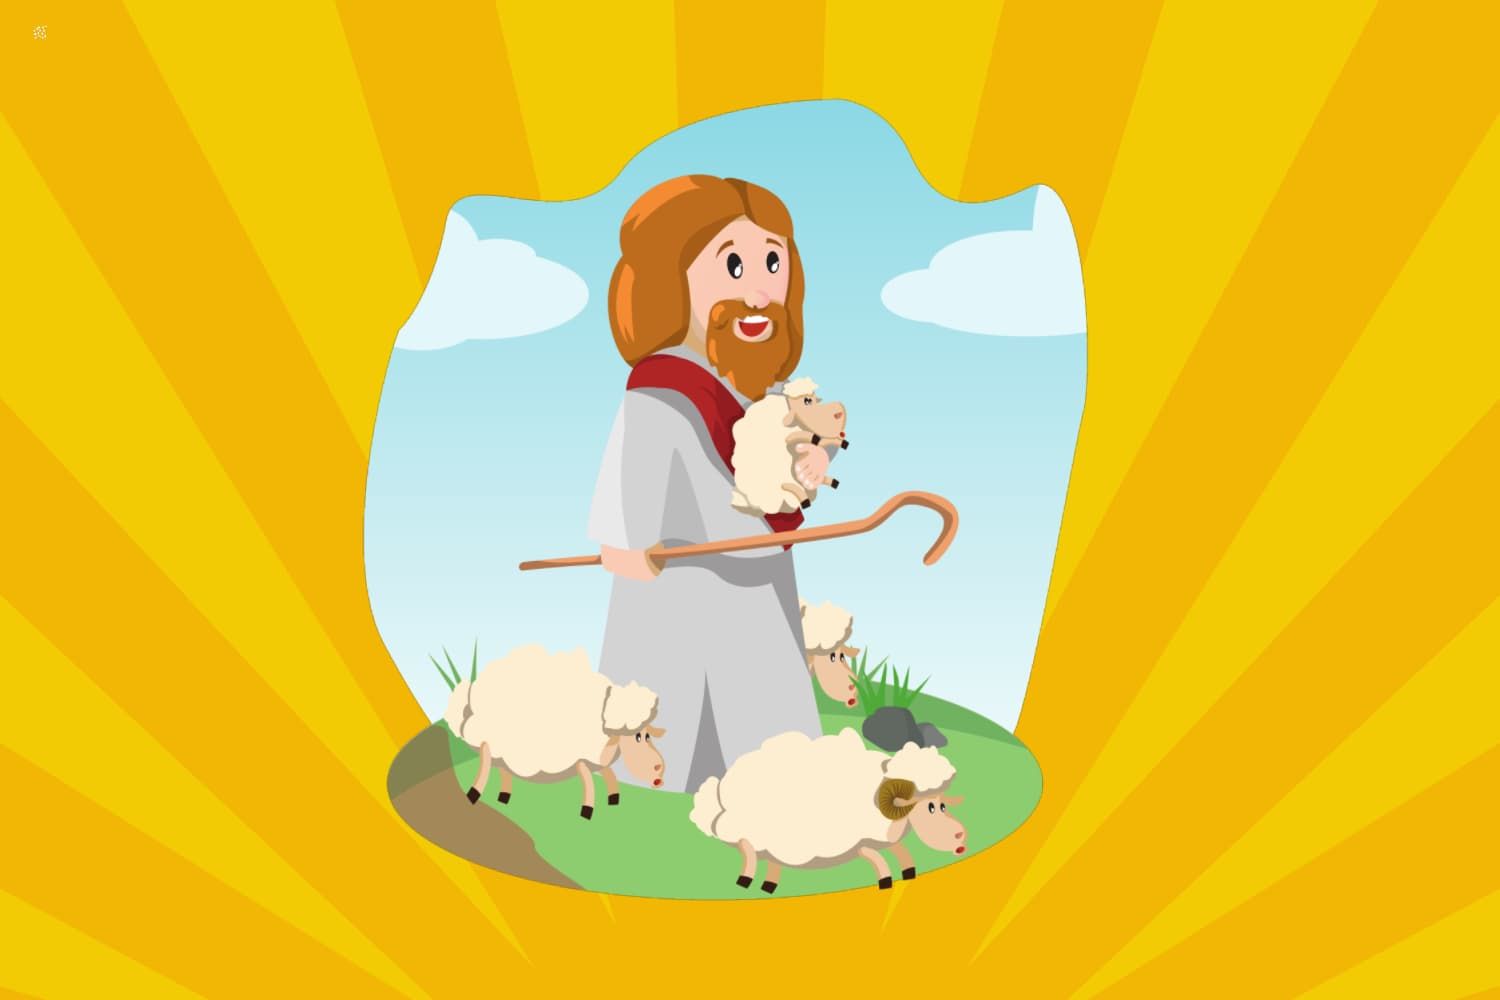 Childrens%20moment%20-%20NT%20Teaching%20on%20the%20good%20shepherd%20-%20Recognizing%20the%20shepherds%20voice%202-62442aa4 Caring for each other